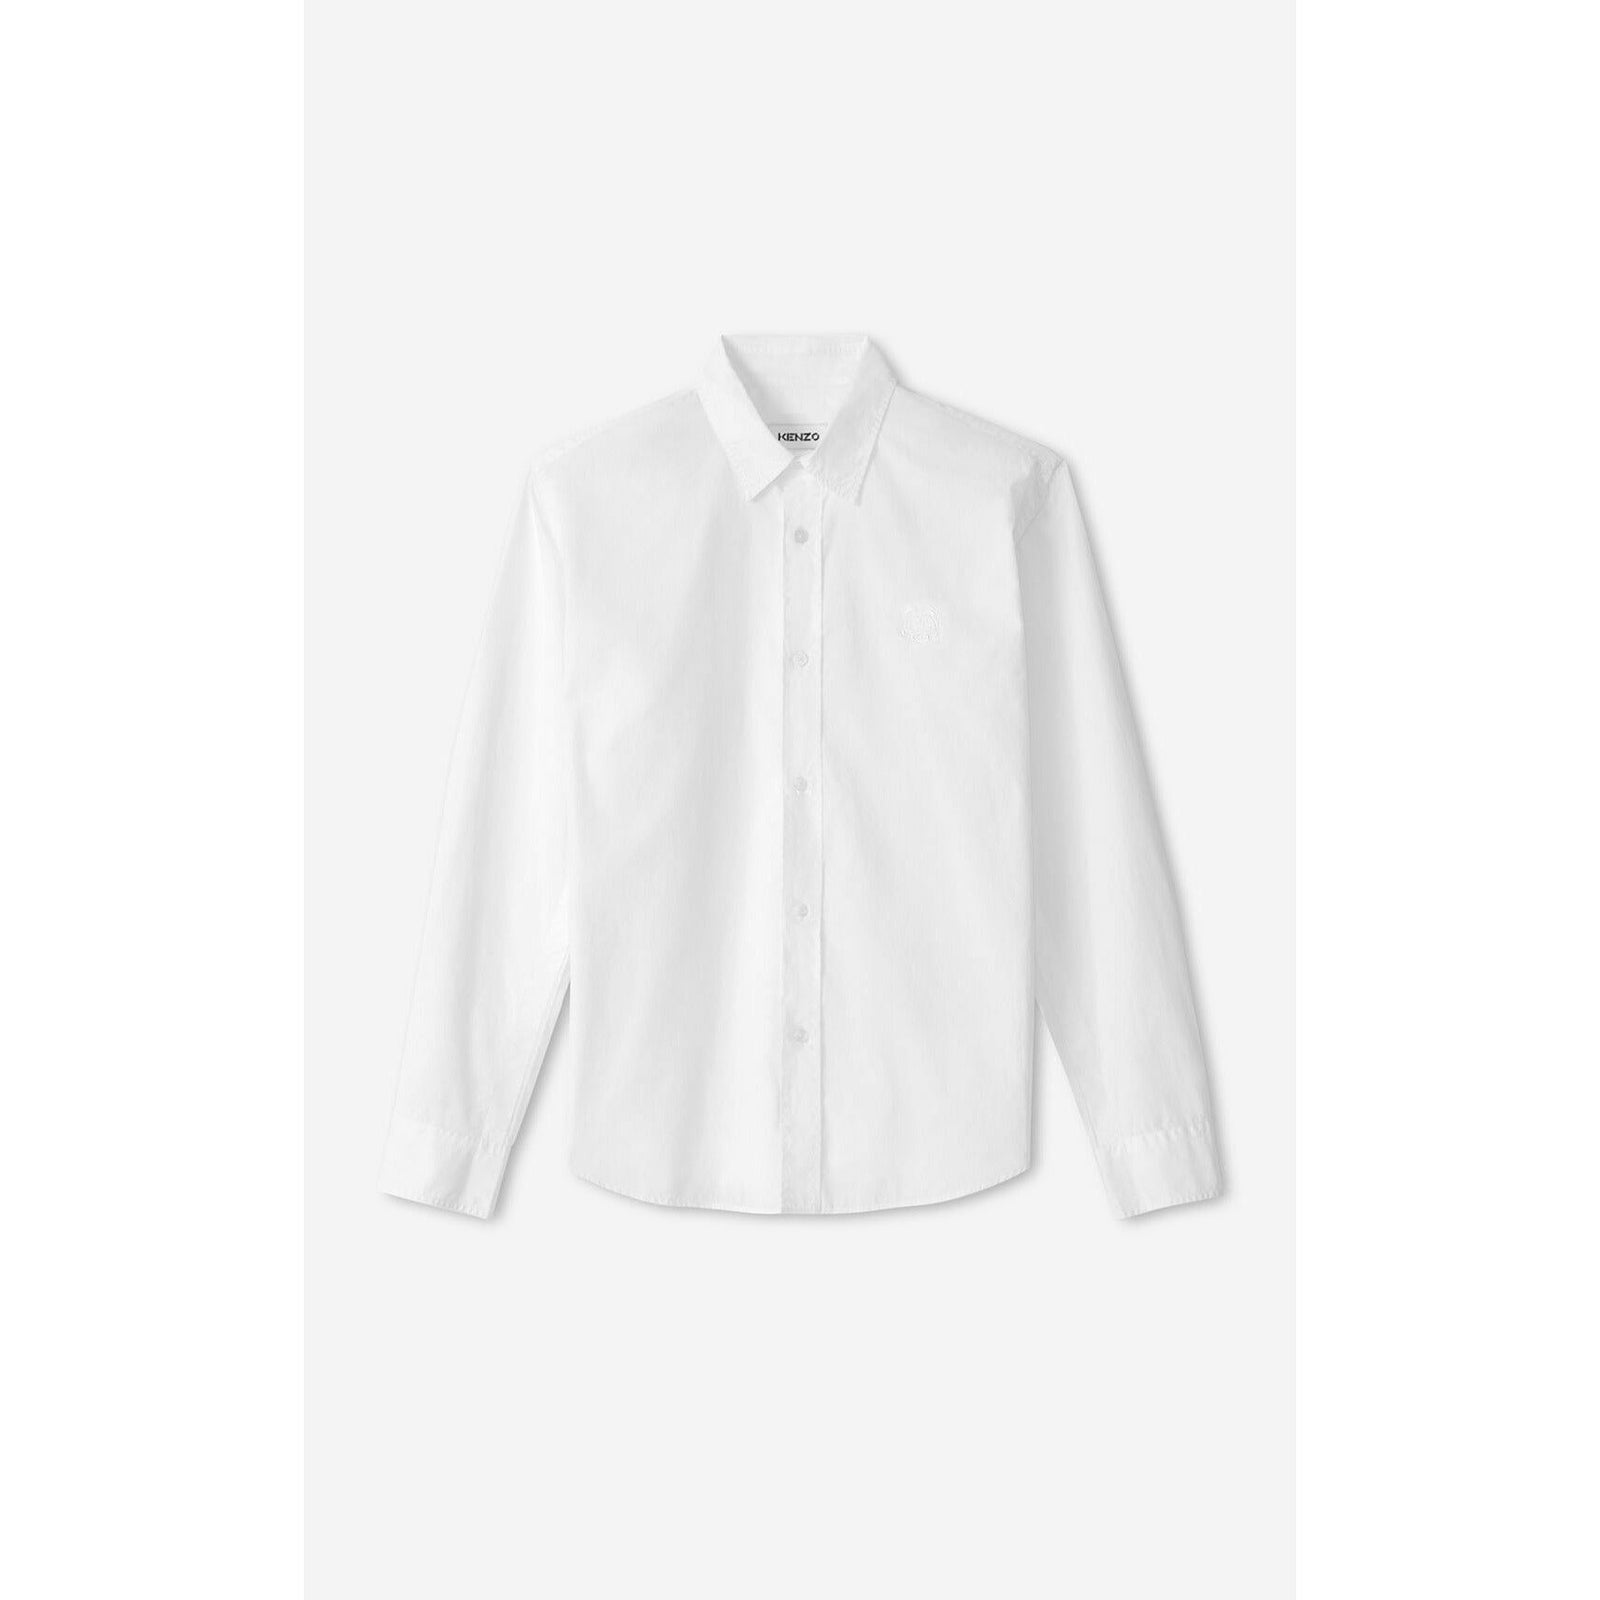 TIGER CREST CASUAL SHIRT - Yooto